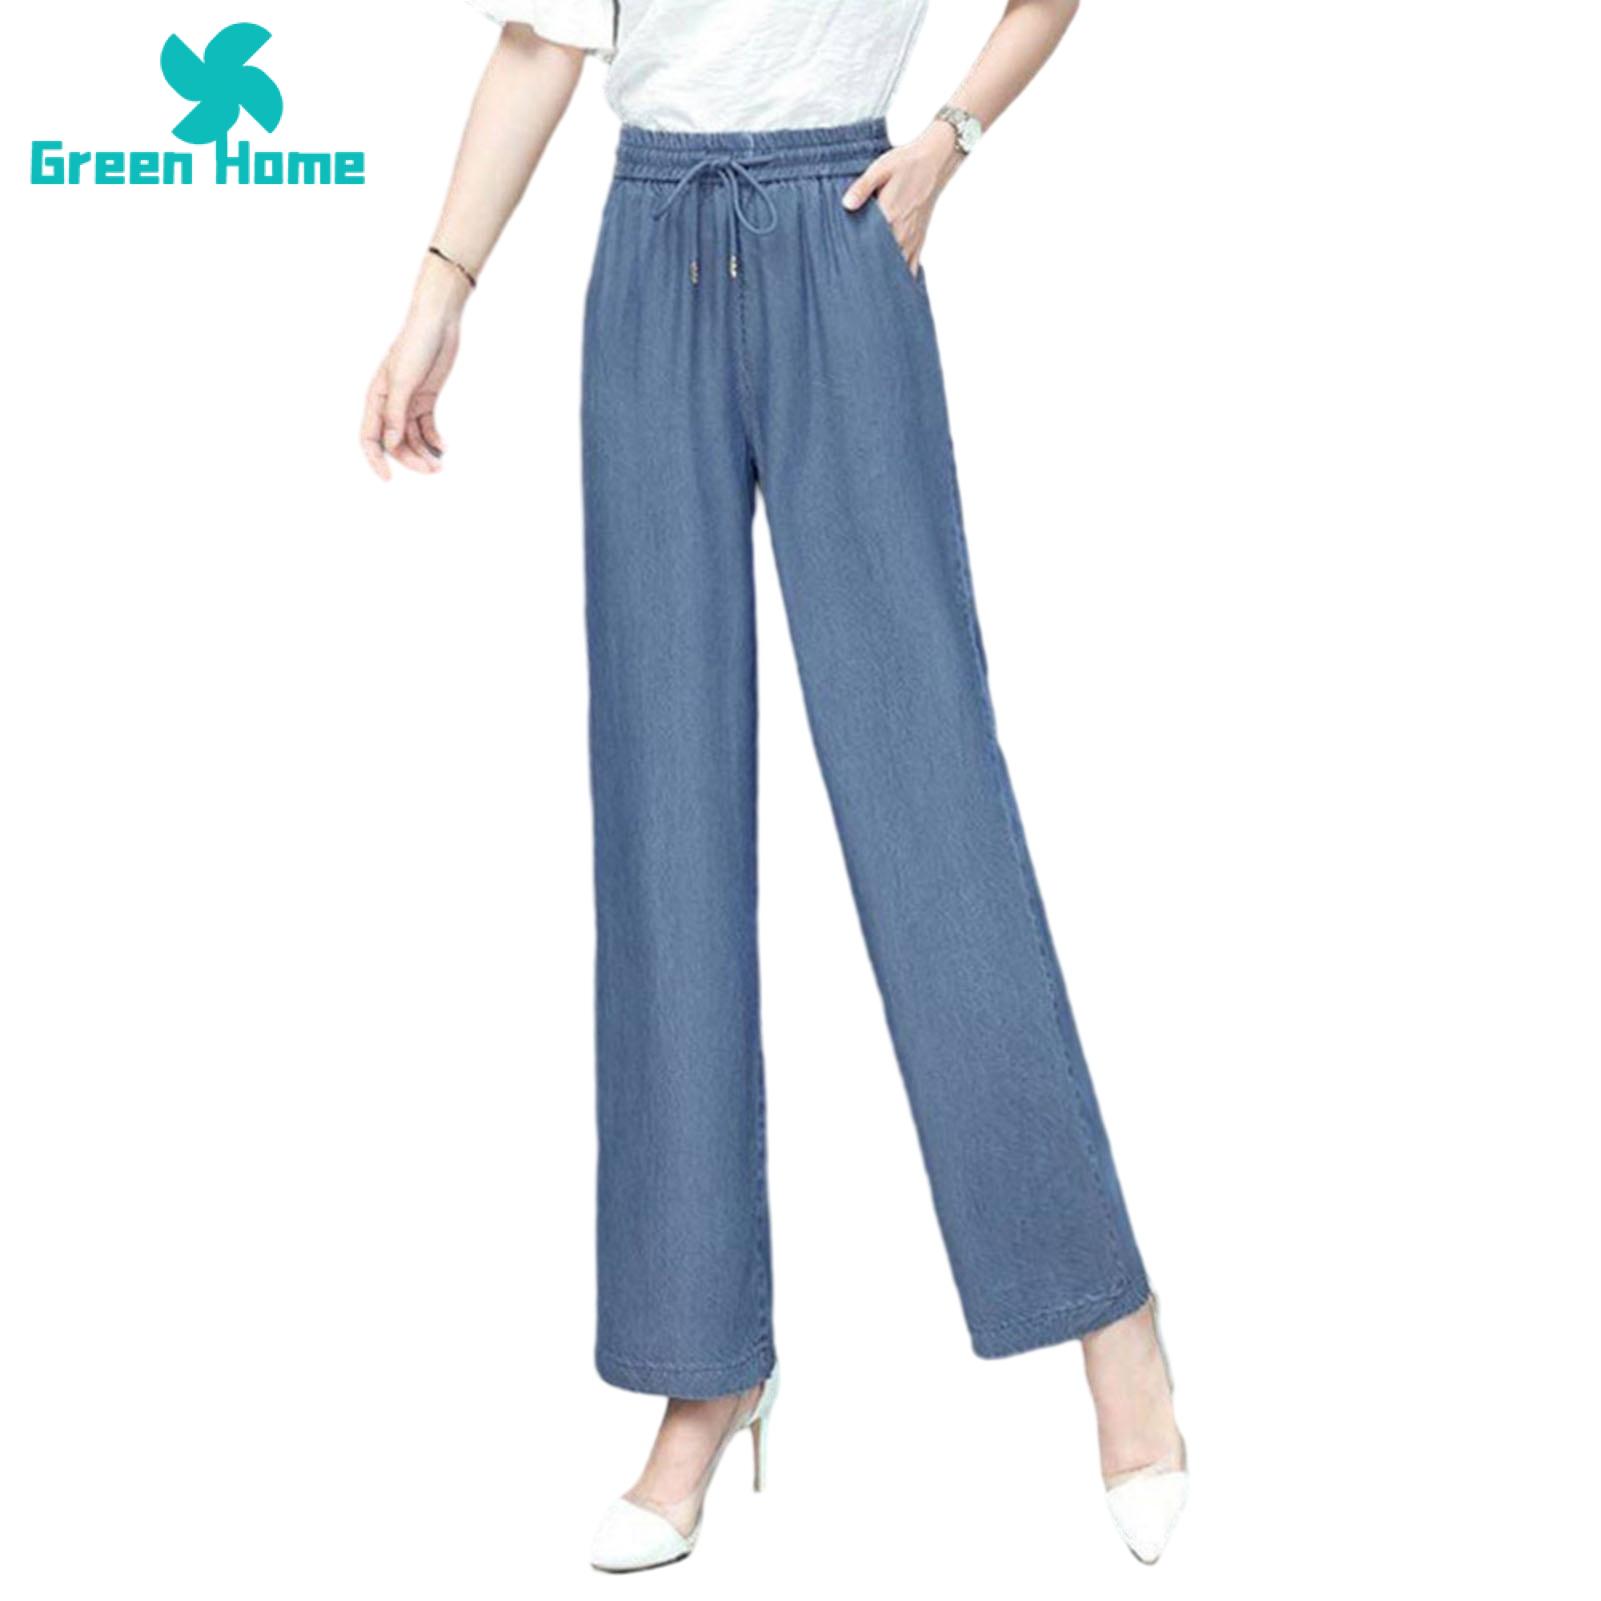 Casual Elastic Waist Drawstring Side Pockets Pants For Women at Rs